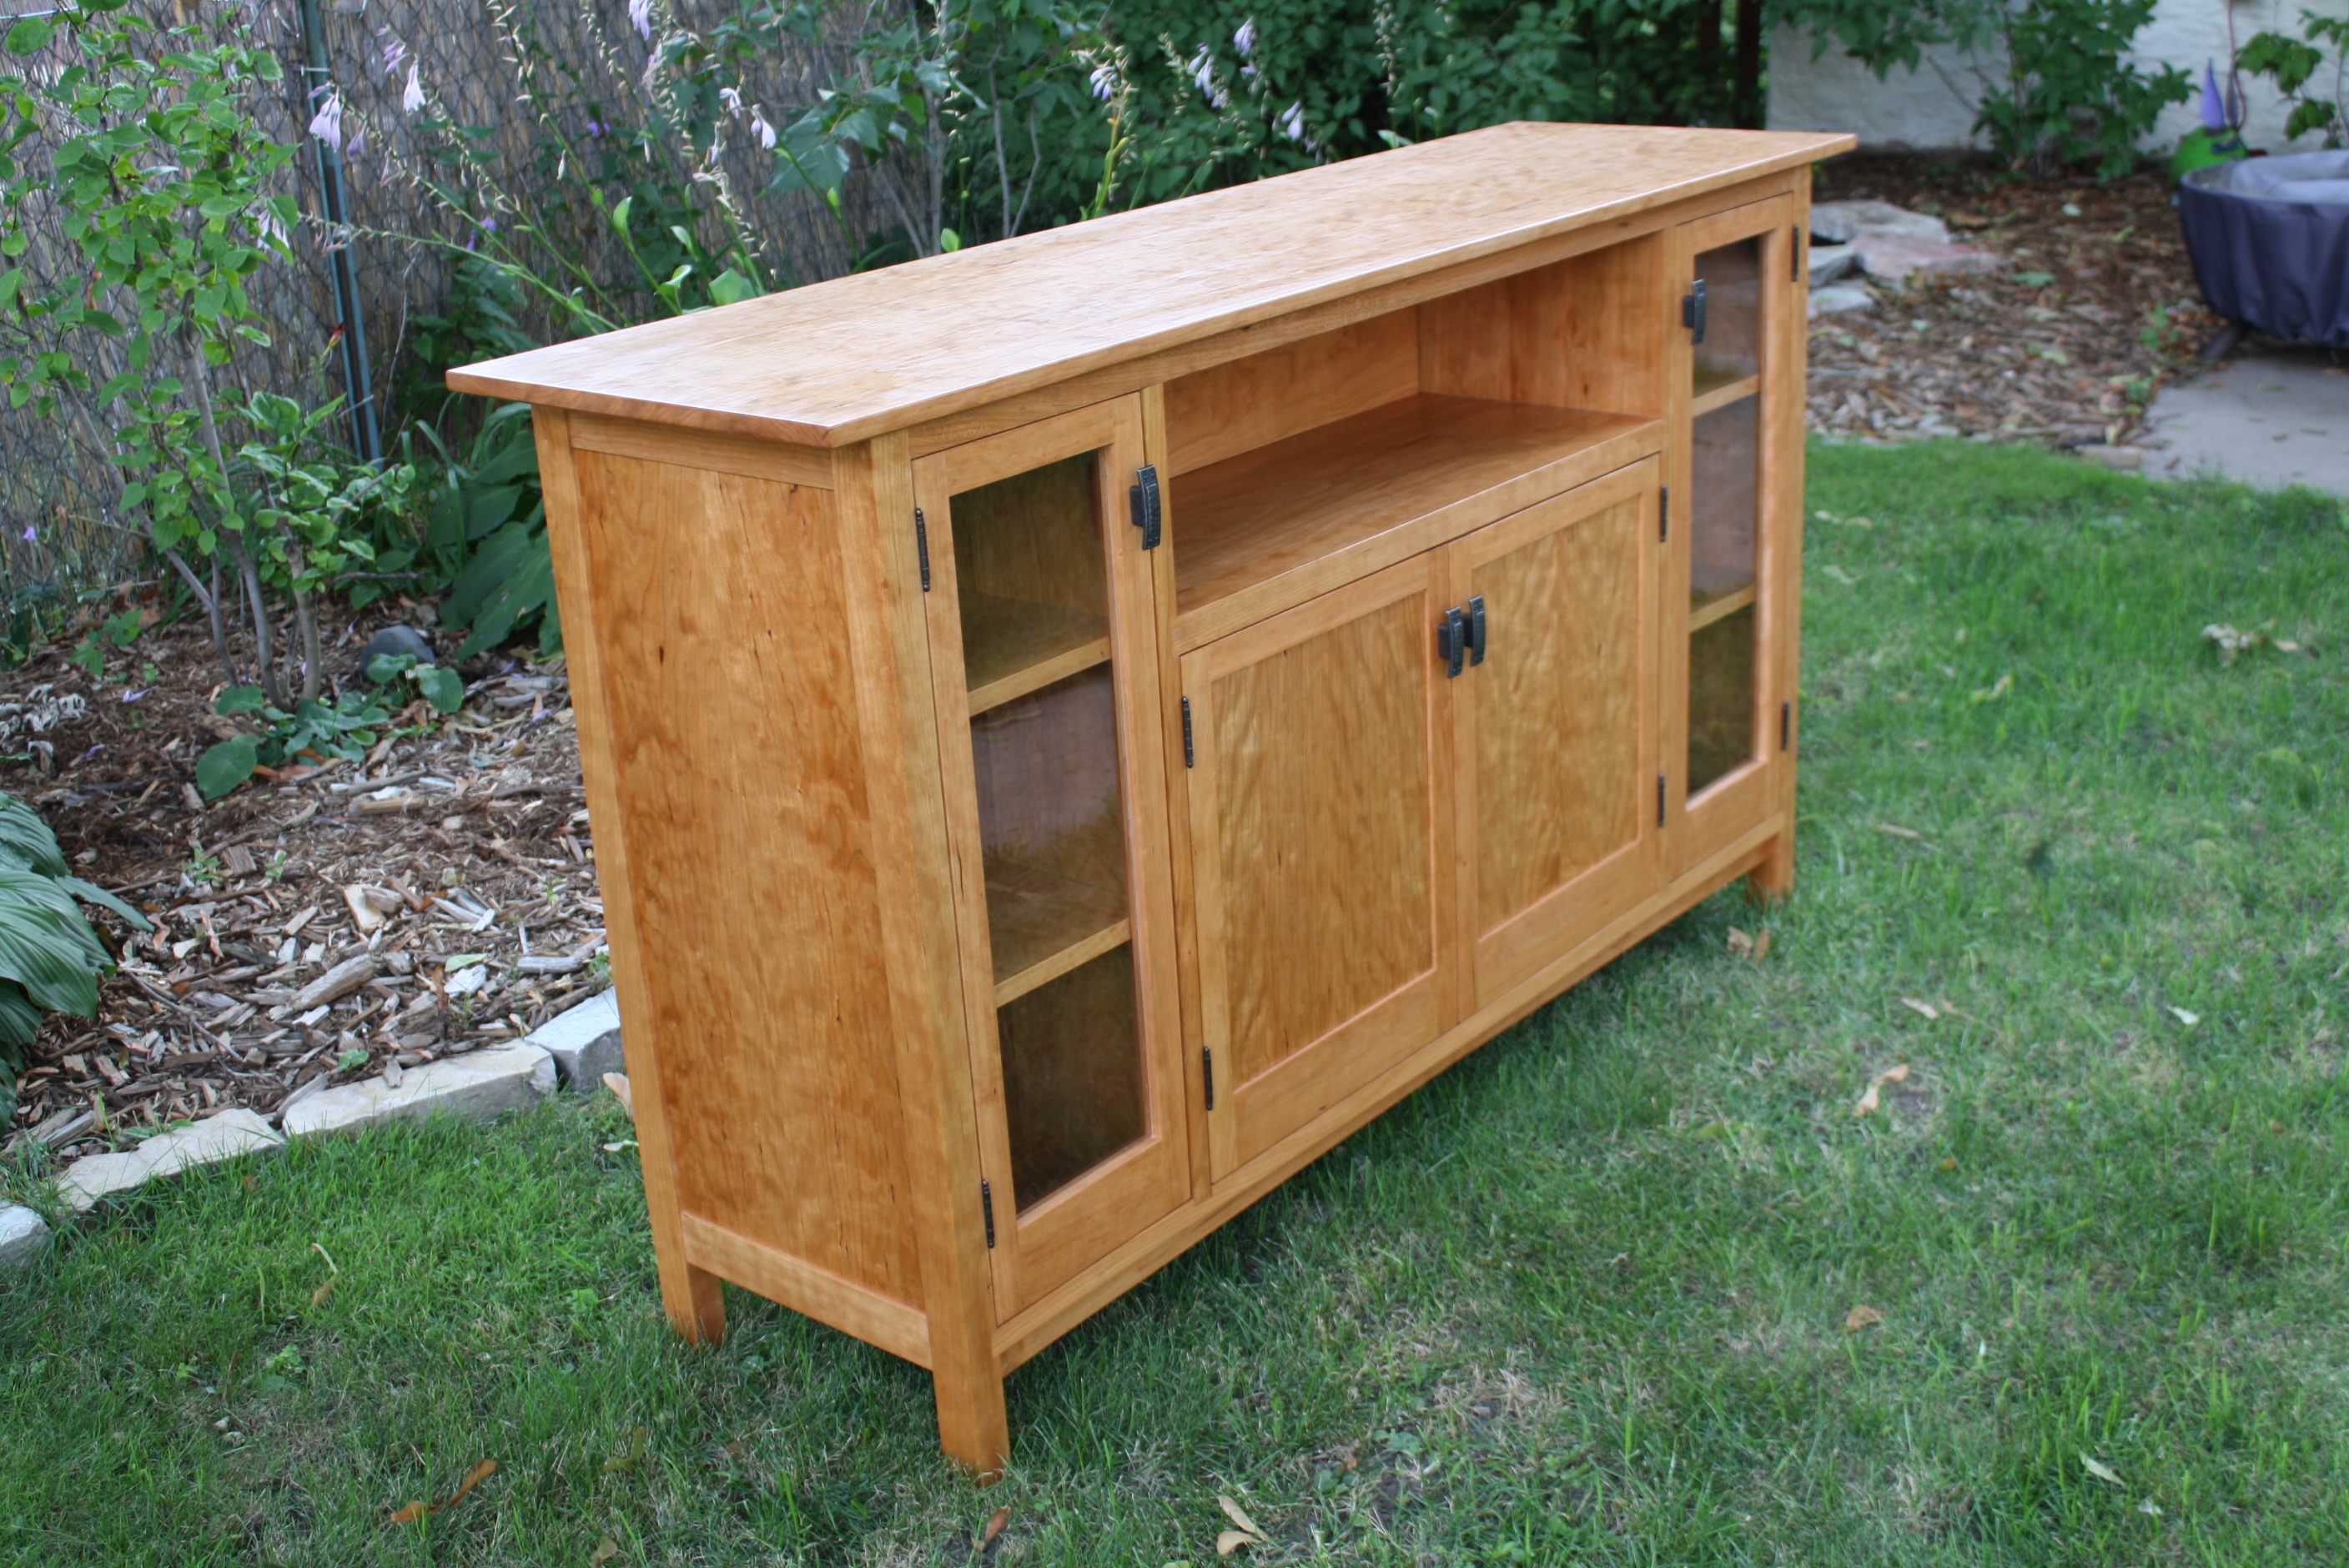 This is a curly cherry entertainment center that I built for a client 